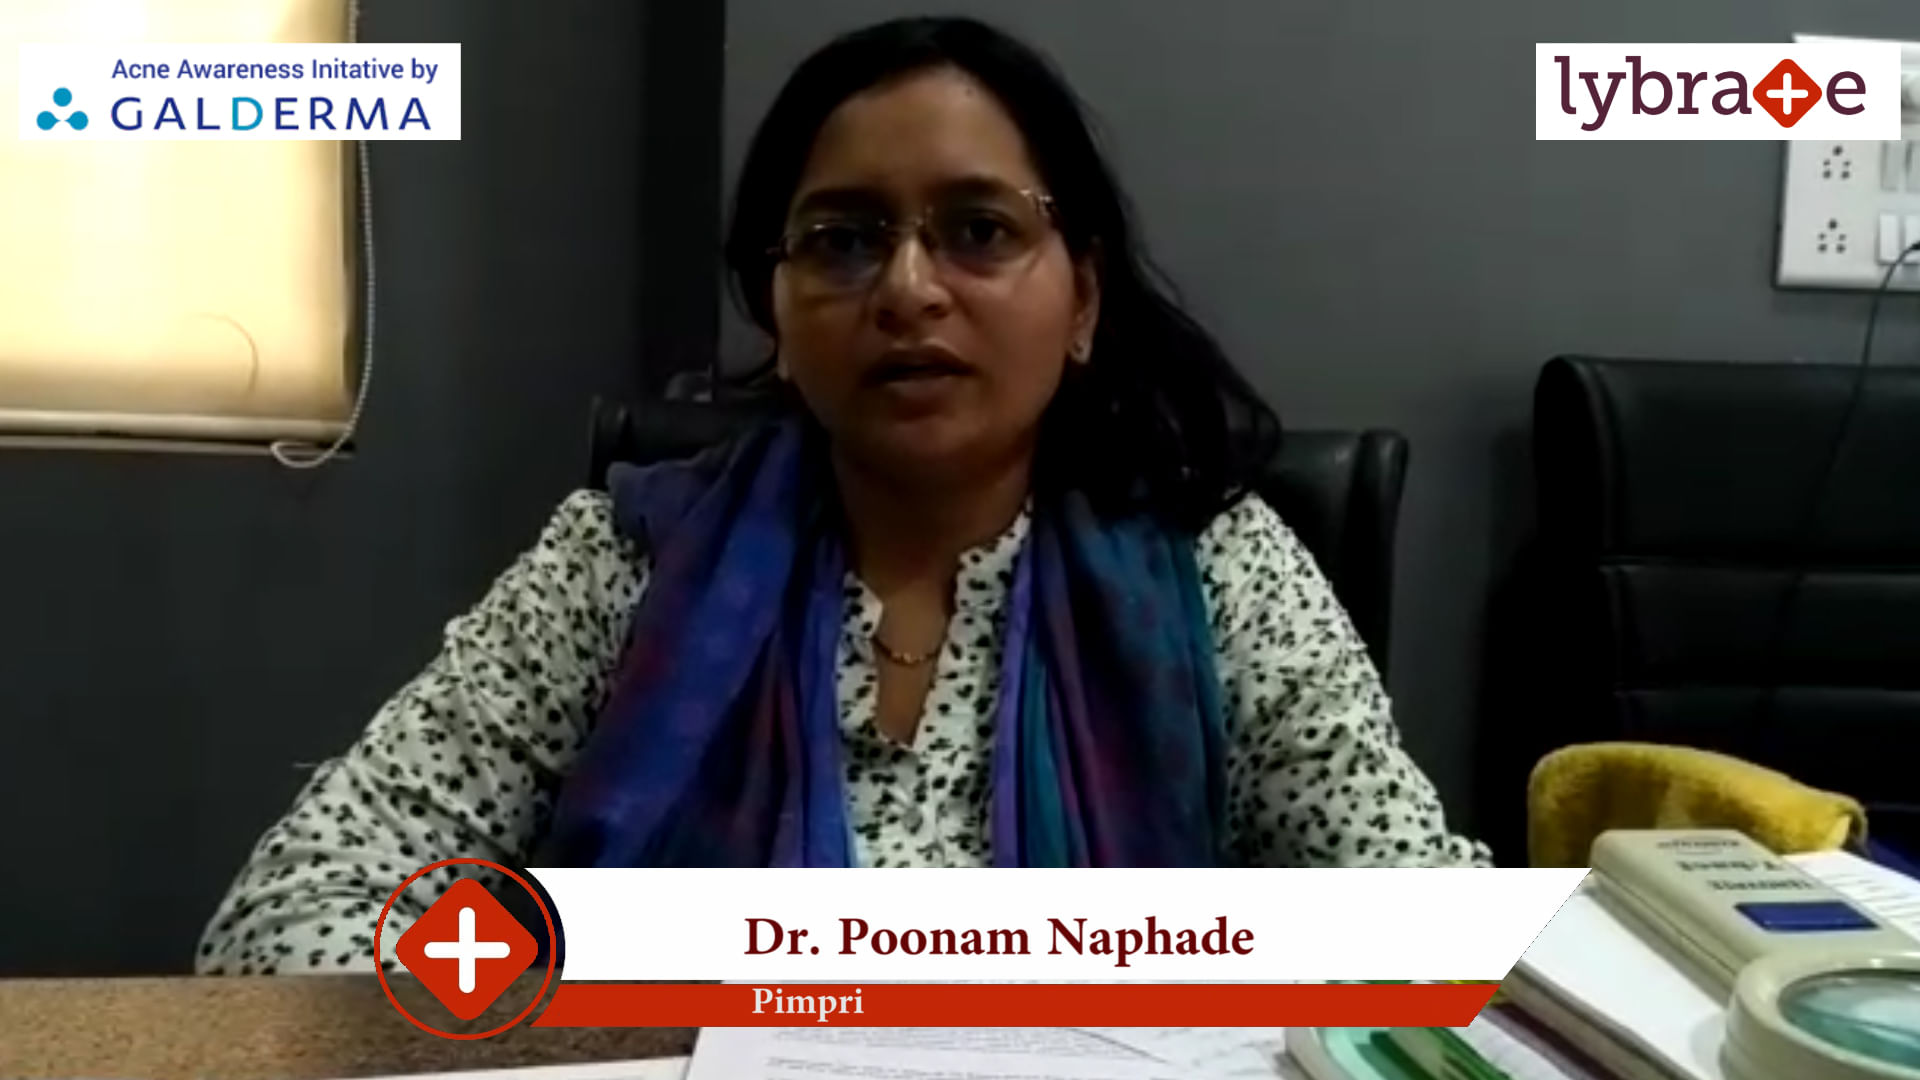 Lybrate | Dr. Poonam Naphade speaks on IMPORTANCE OF TREATING ACNE EARLY